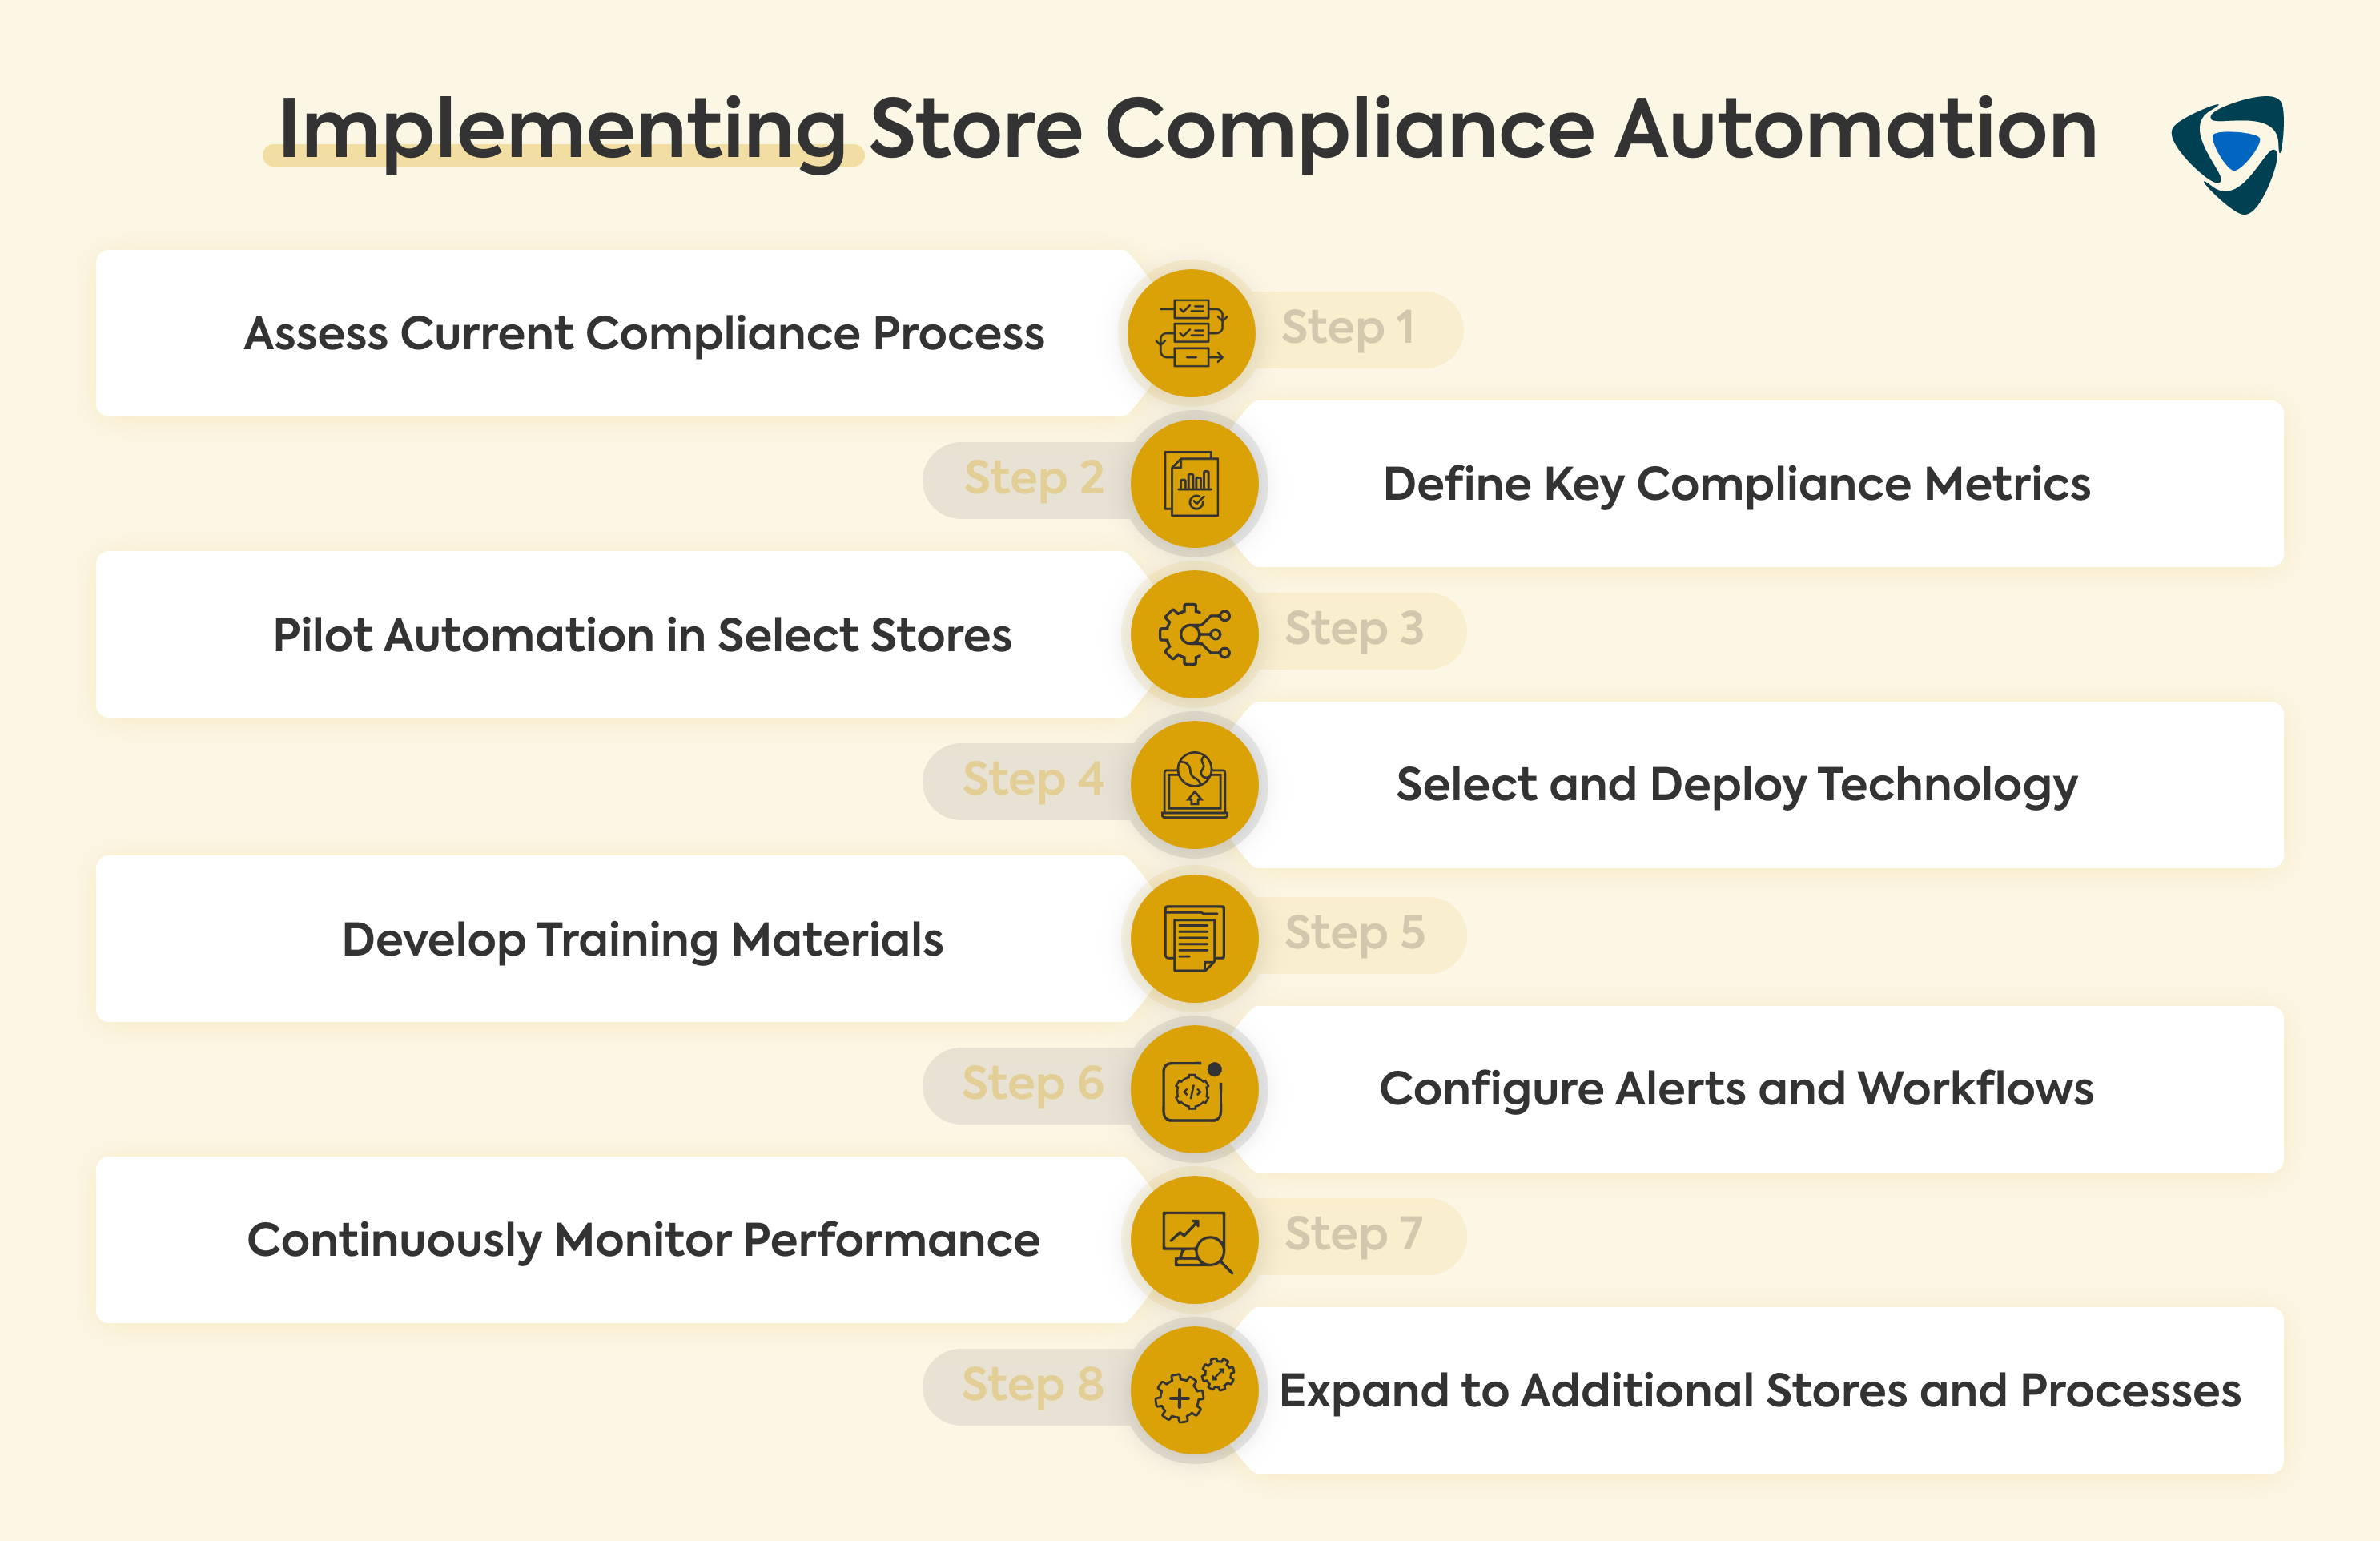 Implementing Store Compliance Automation